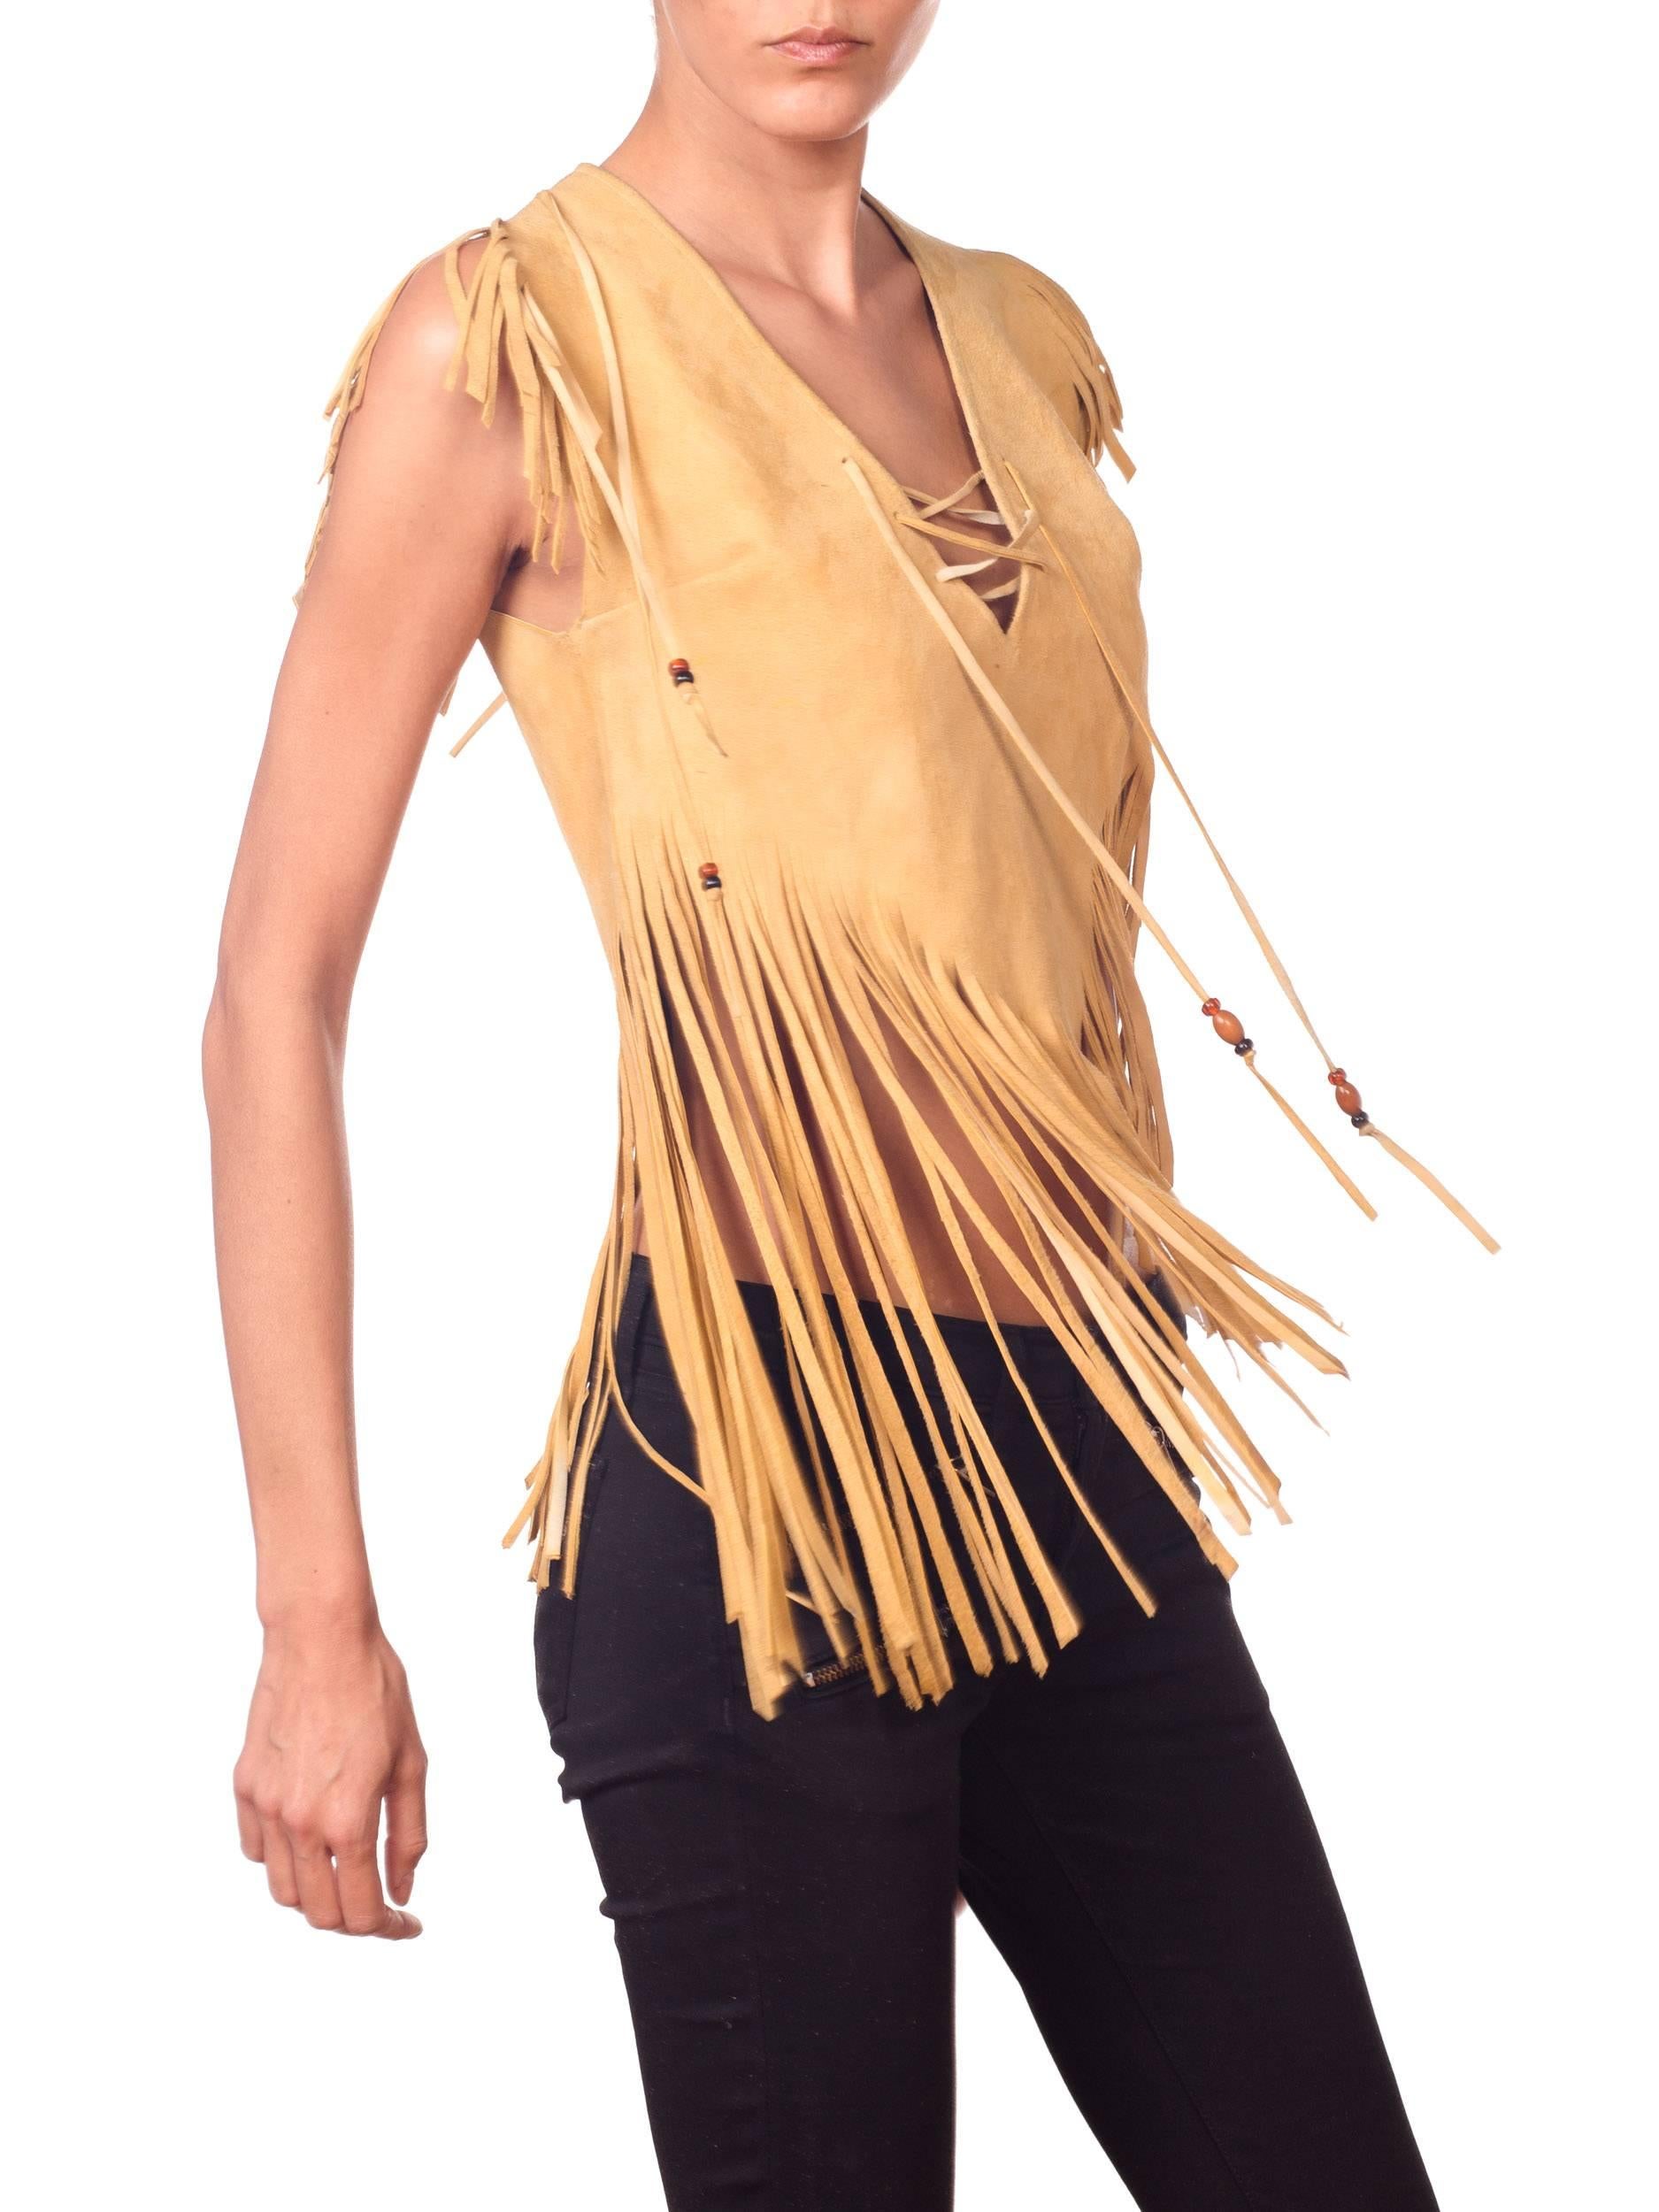 1970S Yellow Tan Suede Leather Beaded Fringe Lace Up Crop Tops Shirt 1